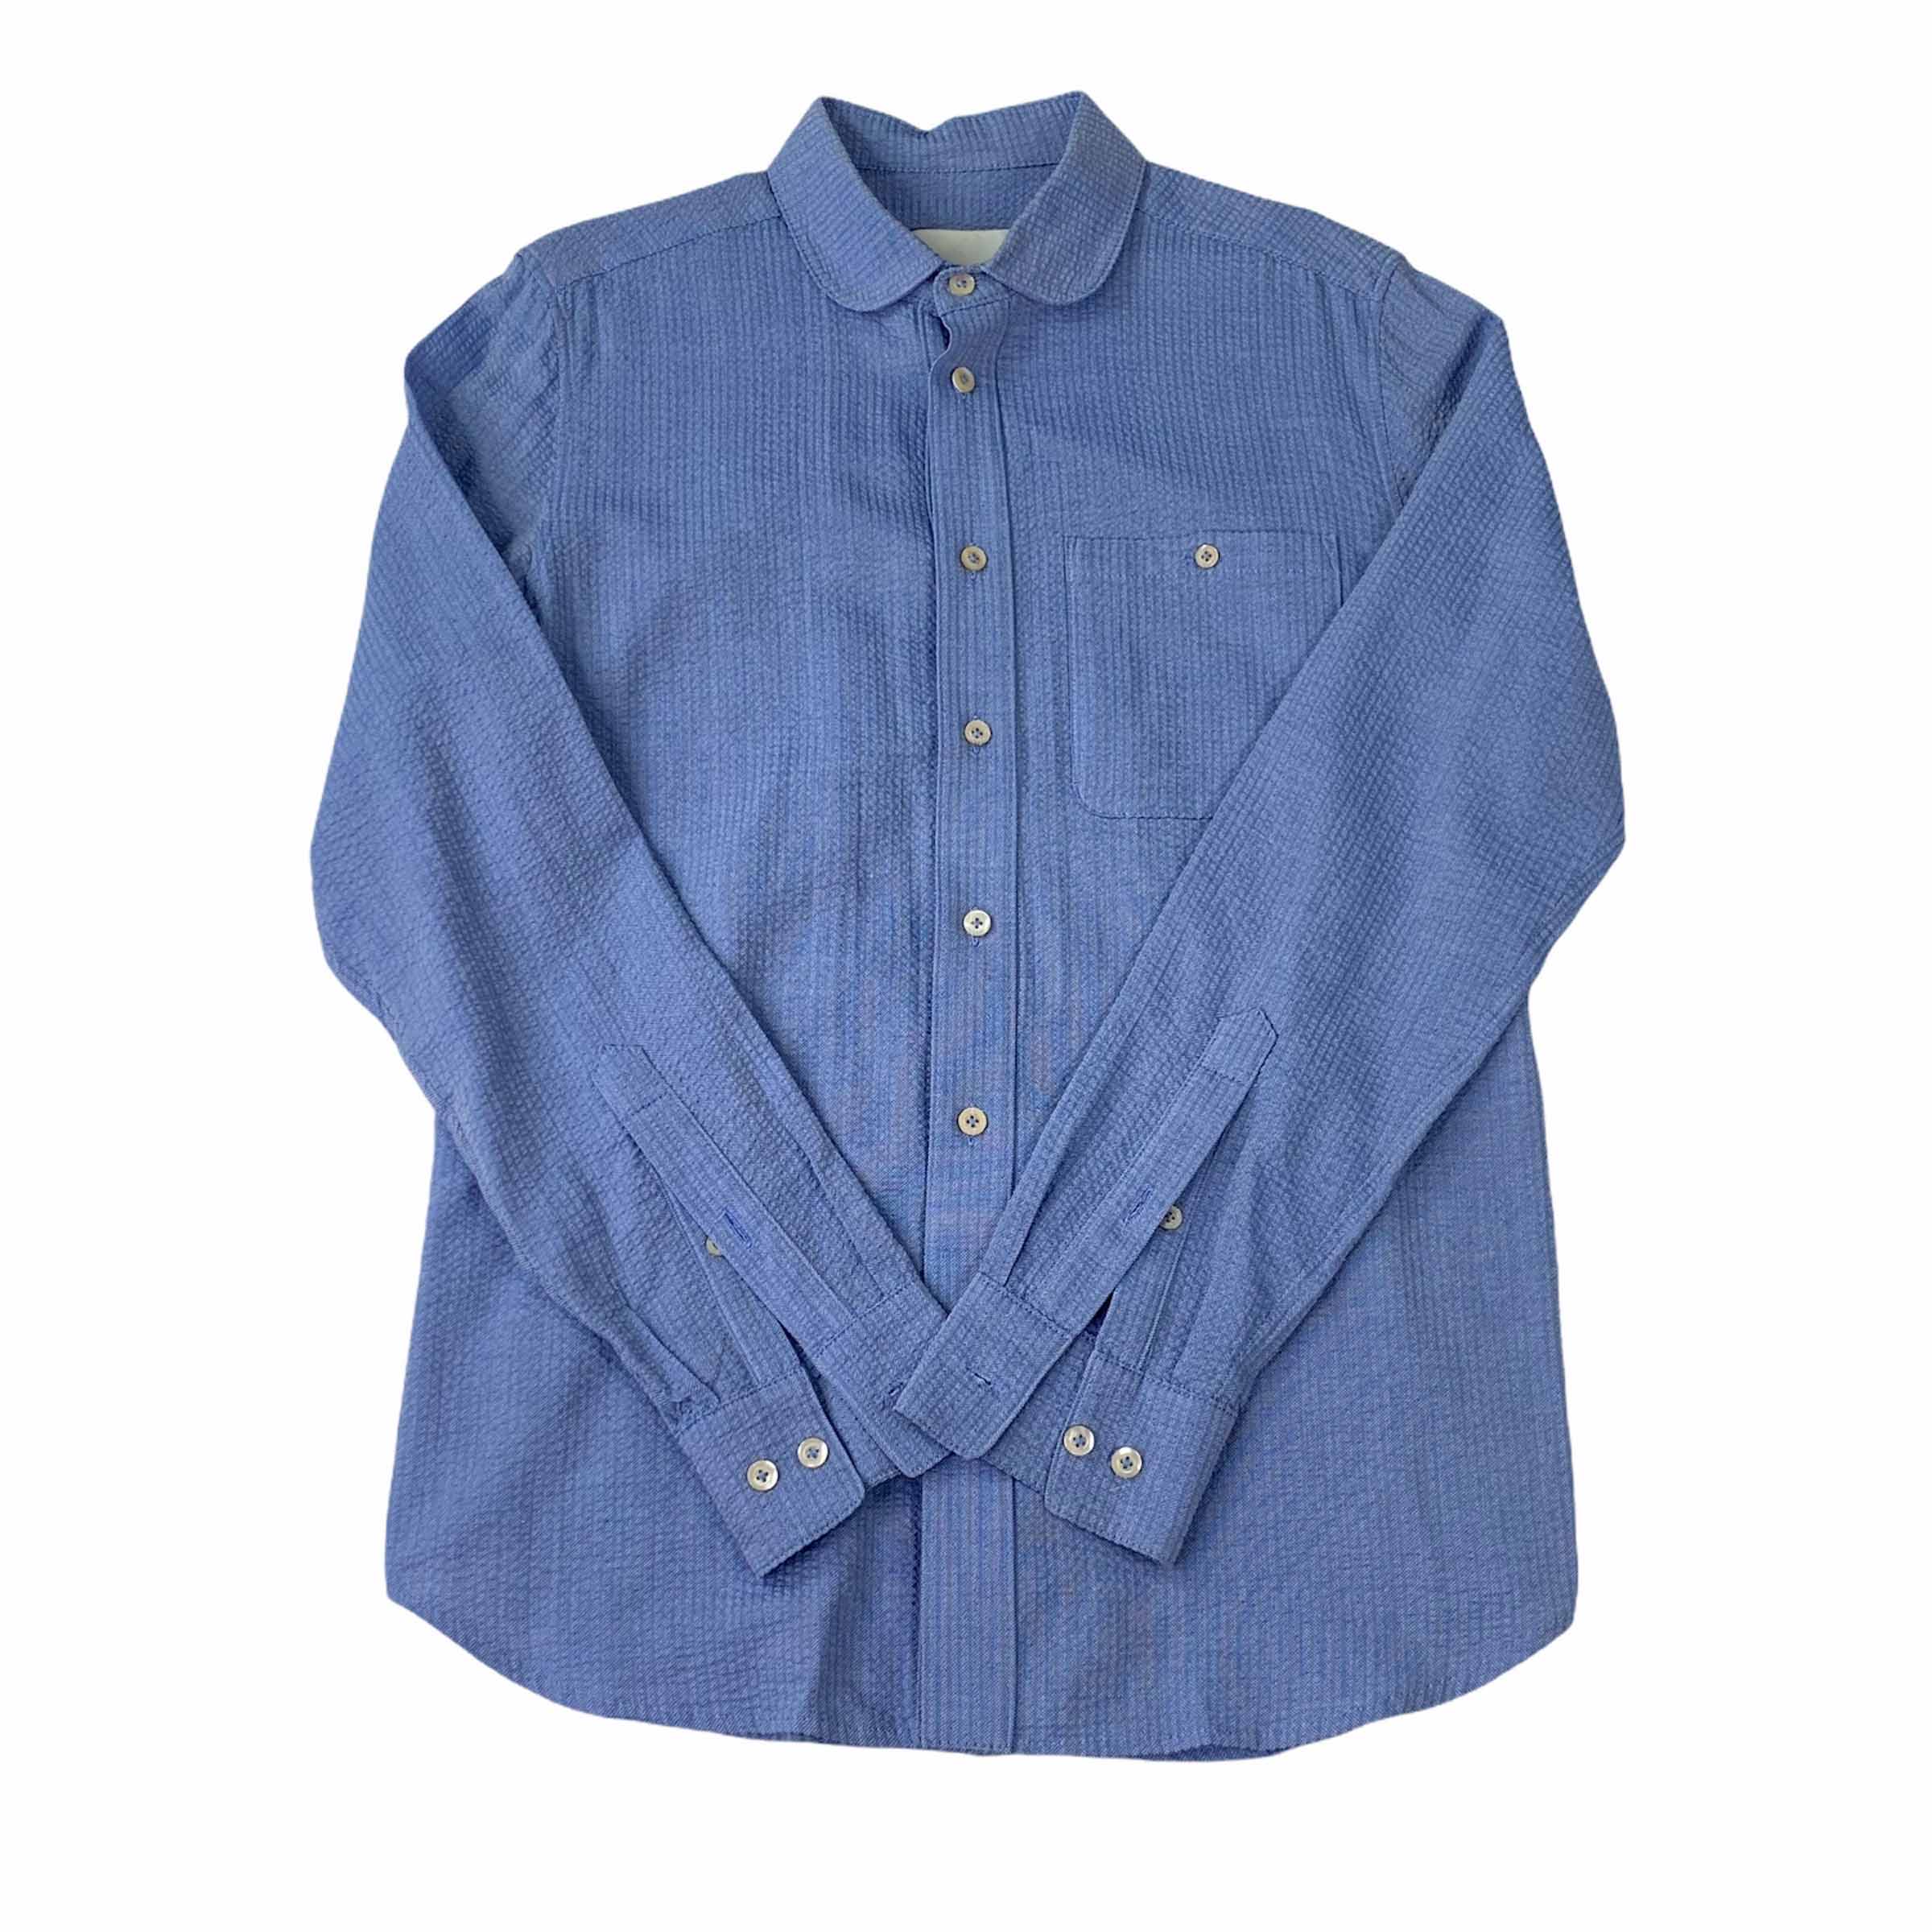 [A Kind of Guise] Round Collar Shirt Skyblue - Size S